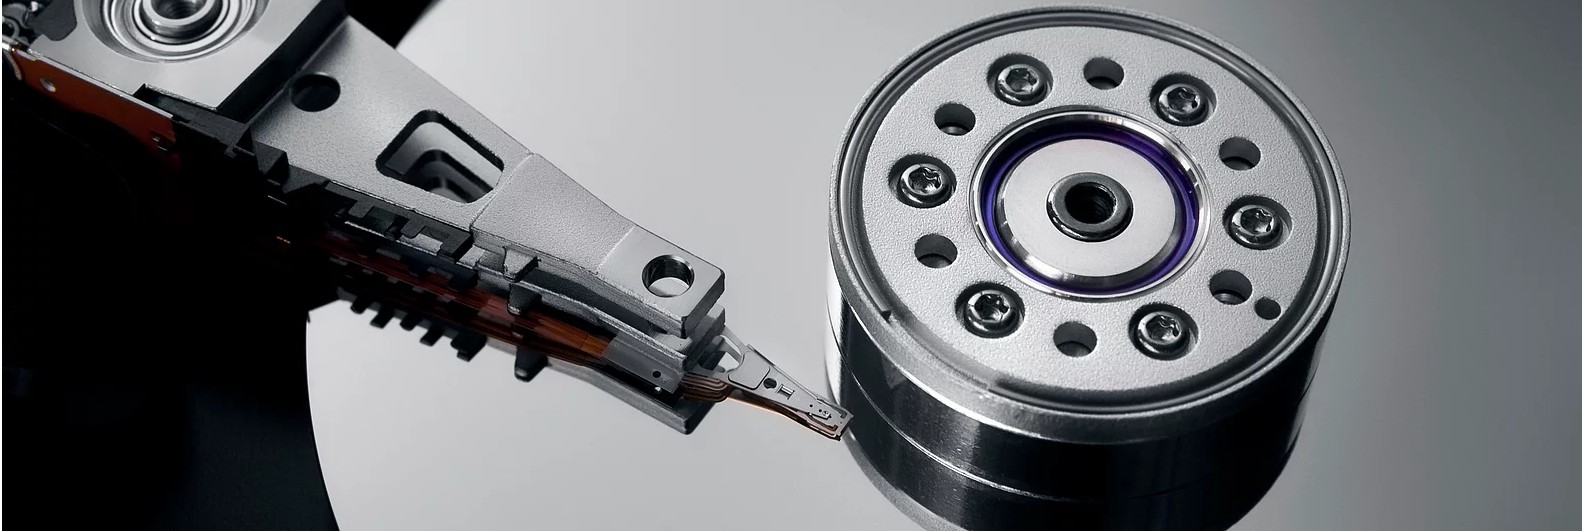 HDD data recovery in Montreal west